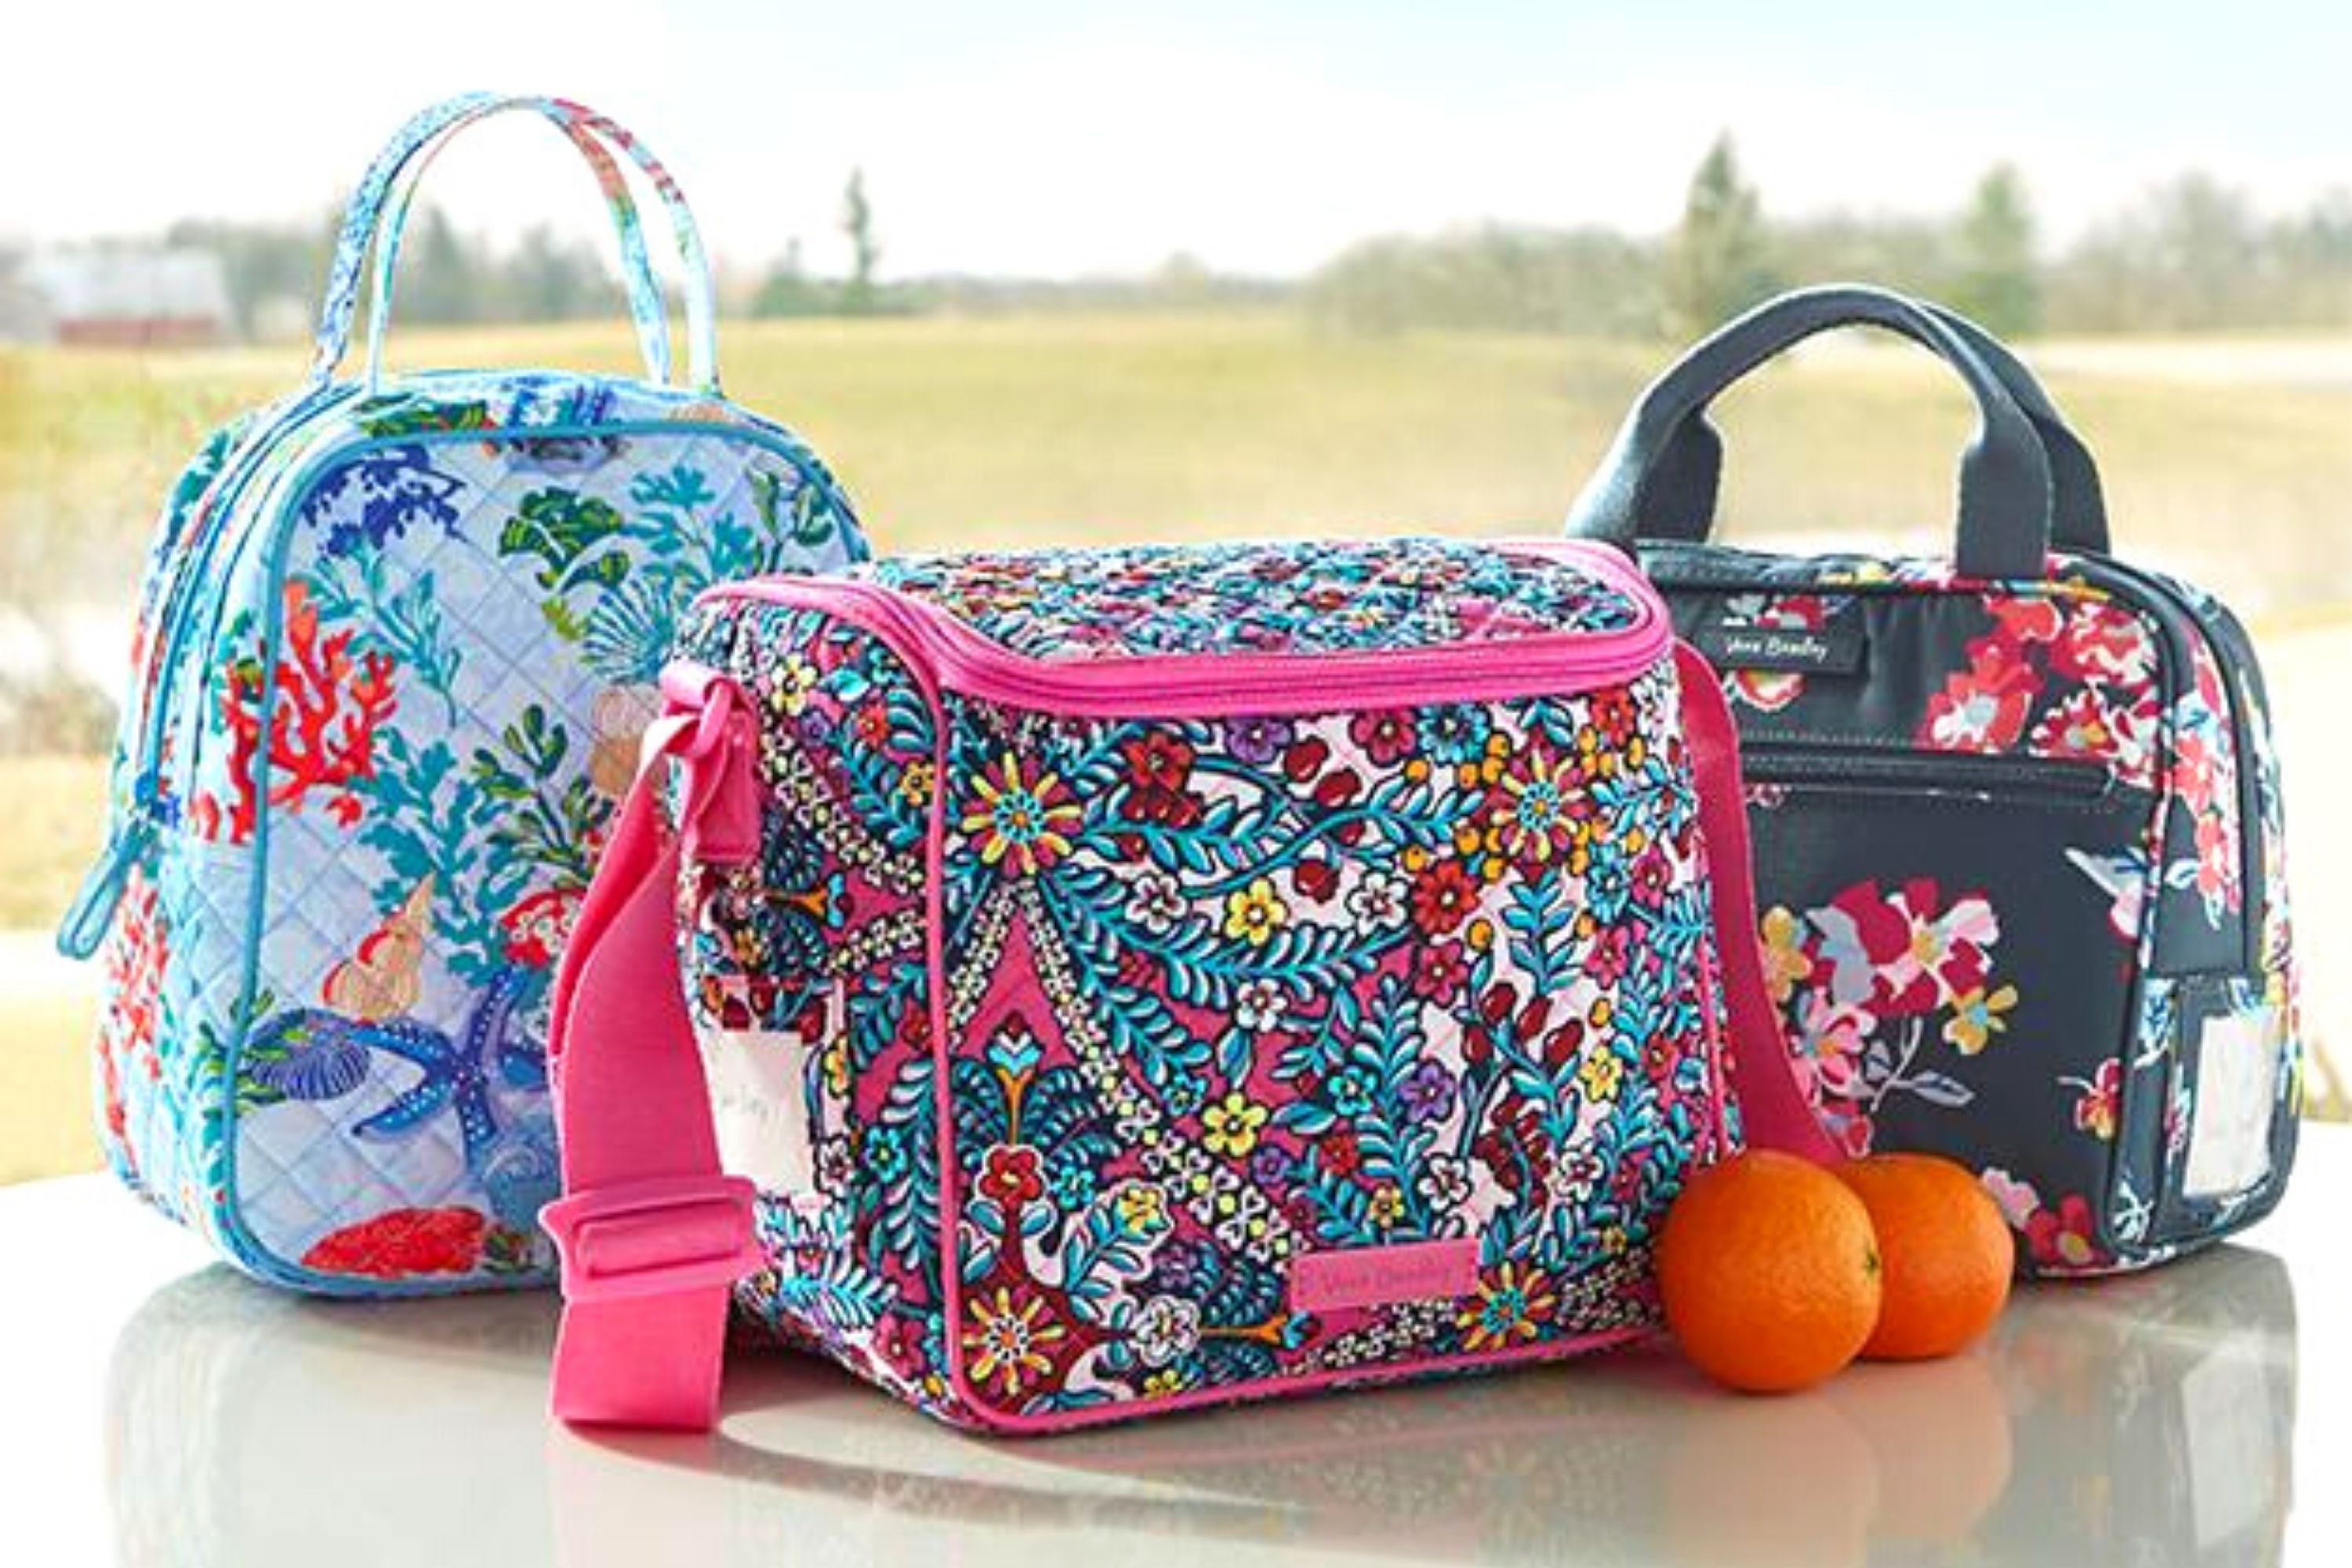 How to Wash a Vera Bradley Lunch Box